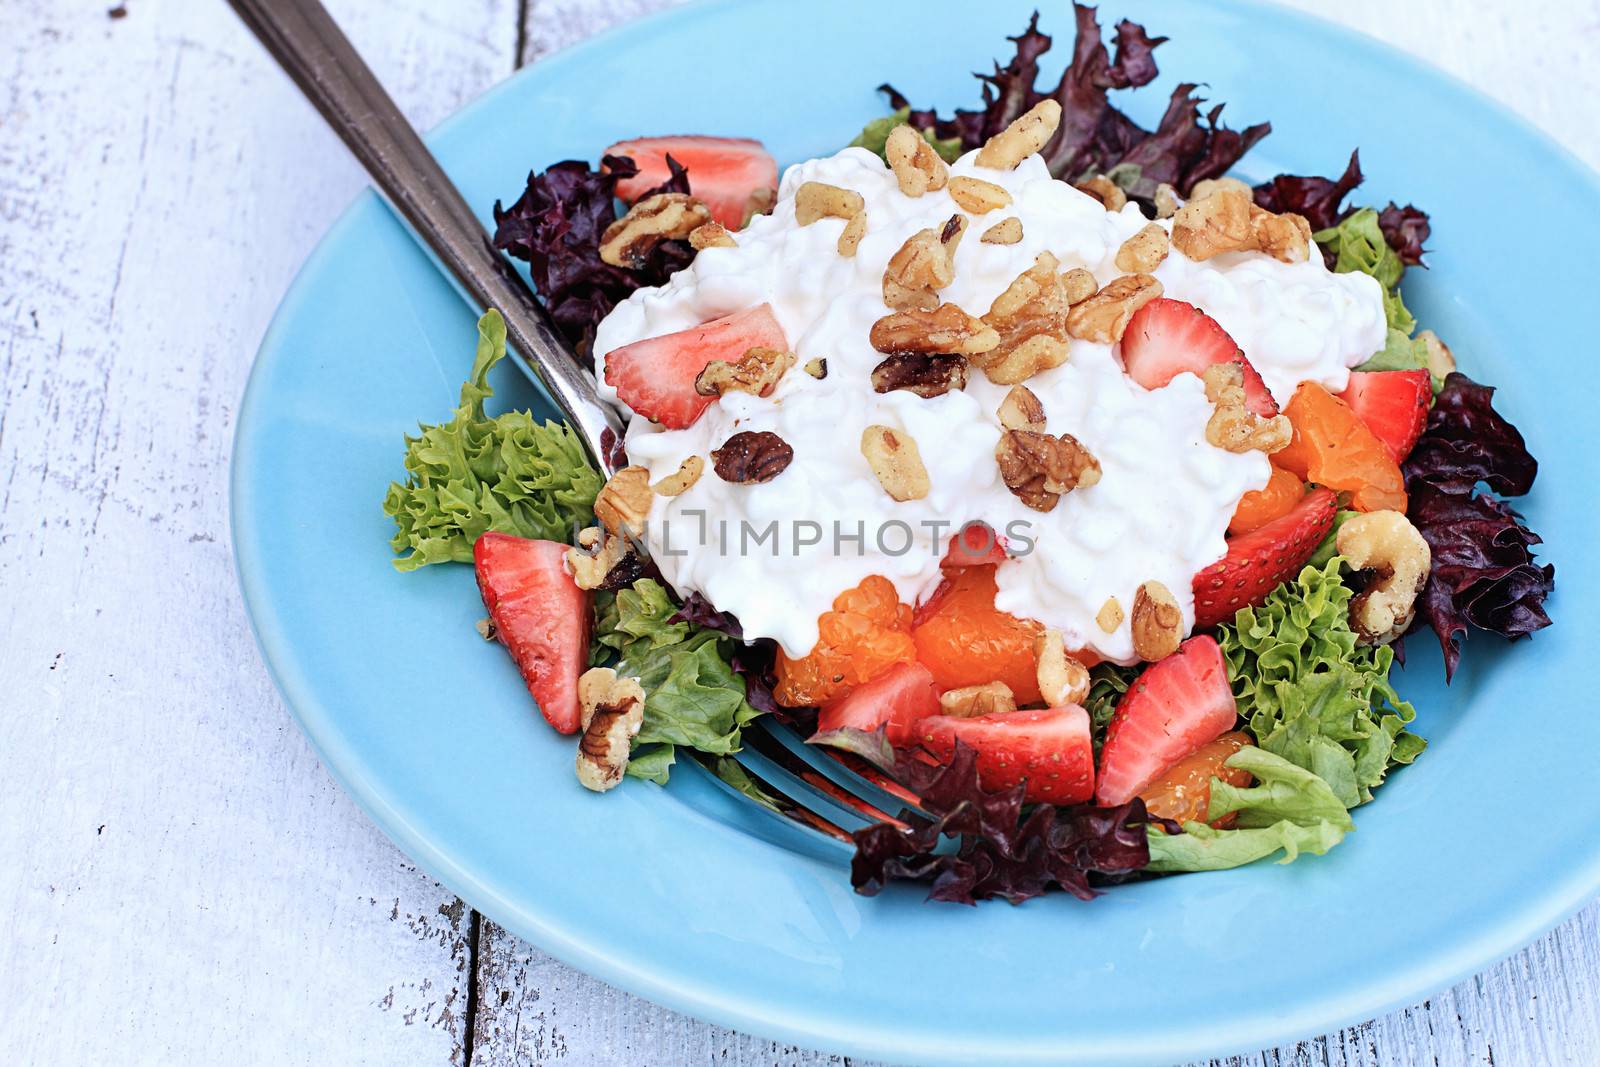 Strawberry, Walnut and Cottage Cheese Salad by StephanieFrey